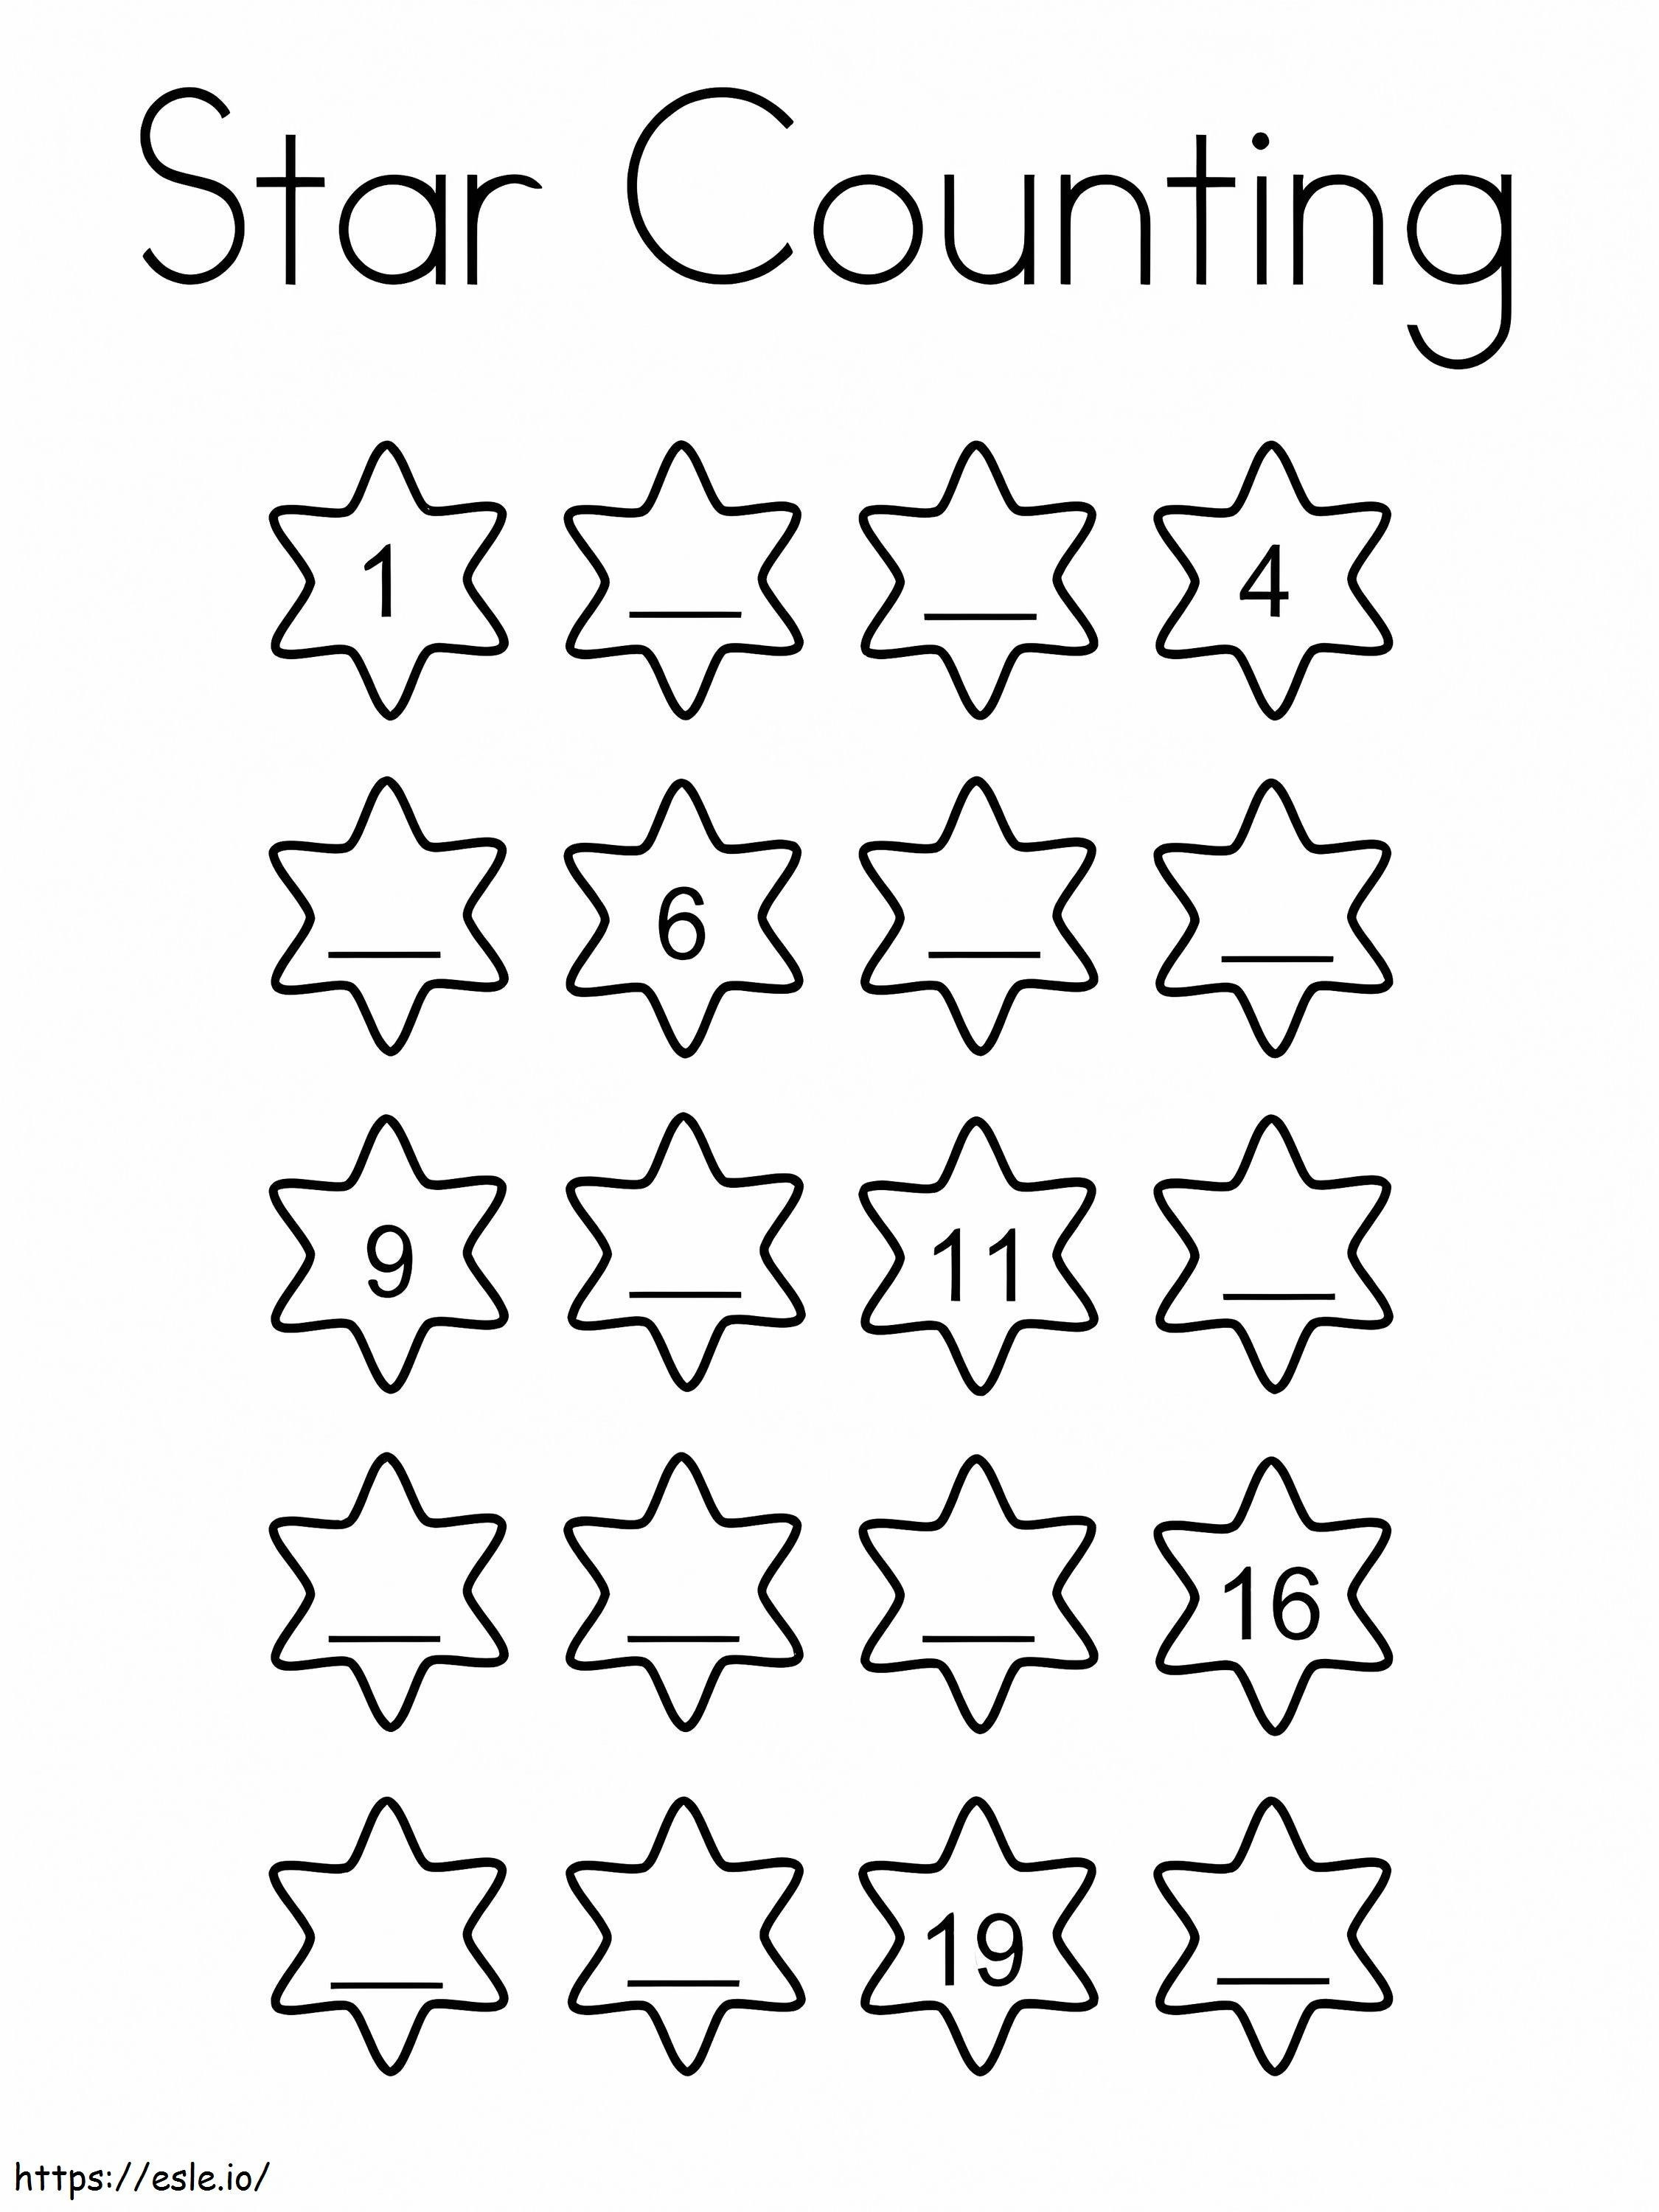 Star Counting coloring page